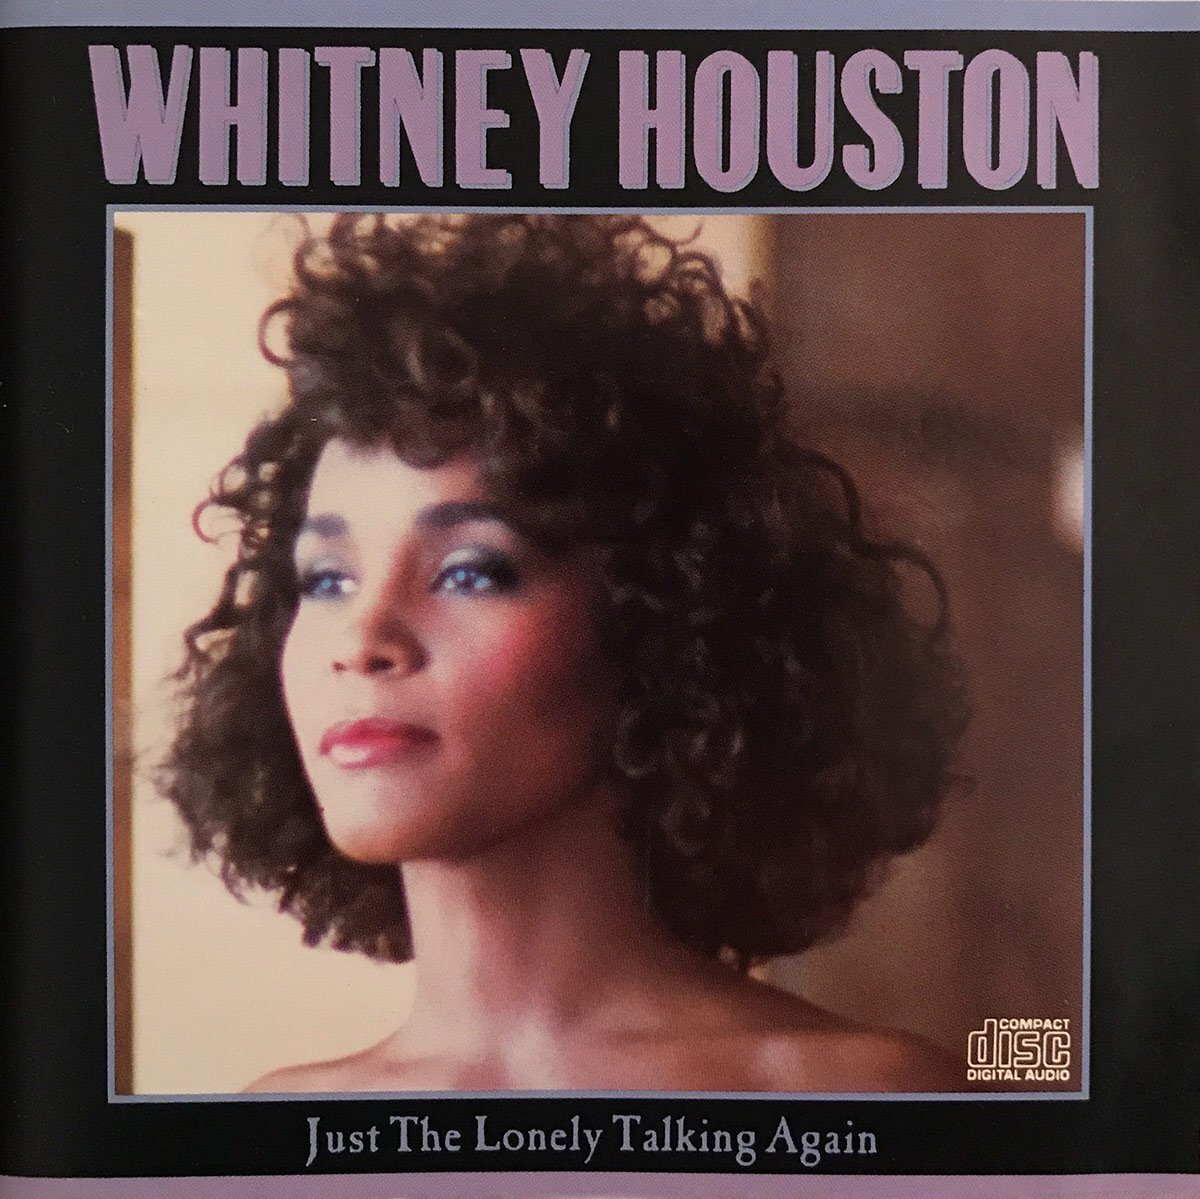 <p>Another “deep cut” in her discography, <a href="https://www.youtube.com/watch?v=Je3QDTxI9Gg">“Just the Lonely Talking Again”</a> is a song that was never formally released as a single, but serves as one of Whitney Houston’s finest records all the same. Wedged in an album that <a href="https://www.guinnessworldrecords.com/world-records/102427-first-album-by-a-solo-female-to-debut-at-no-1-us">produced</a> an astonishing four No. 1 hits, the song remains an underrated and underappreciated gem in Whitney’s catalogue.</p>